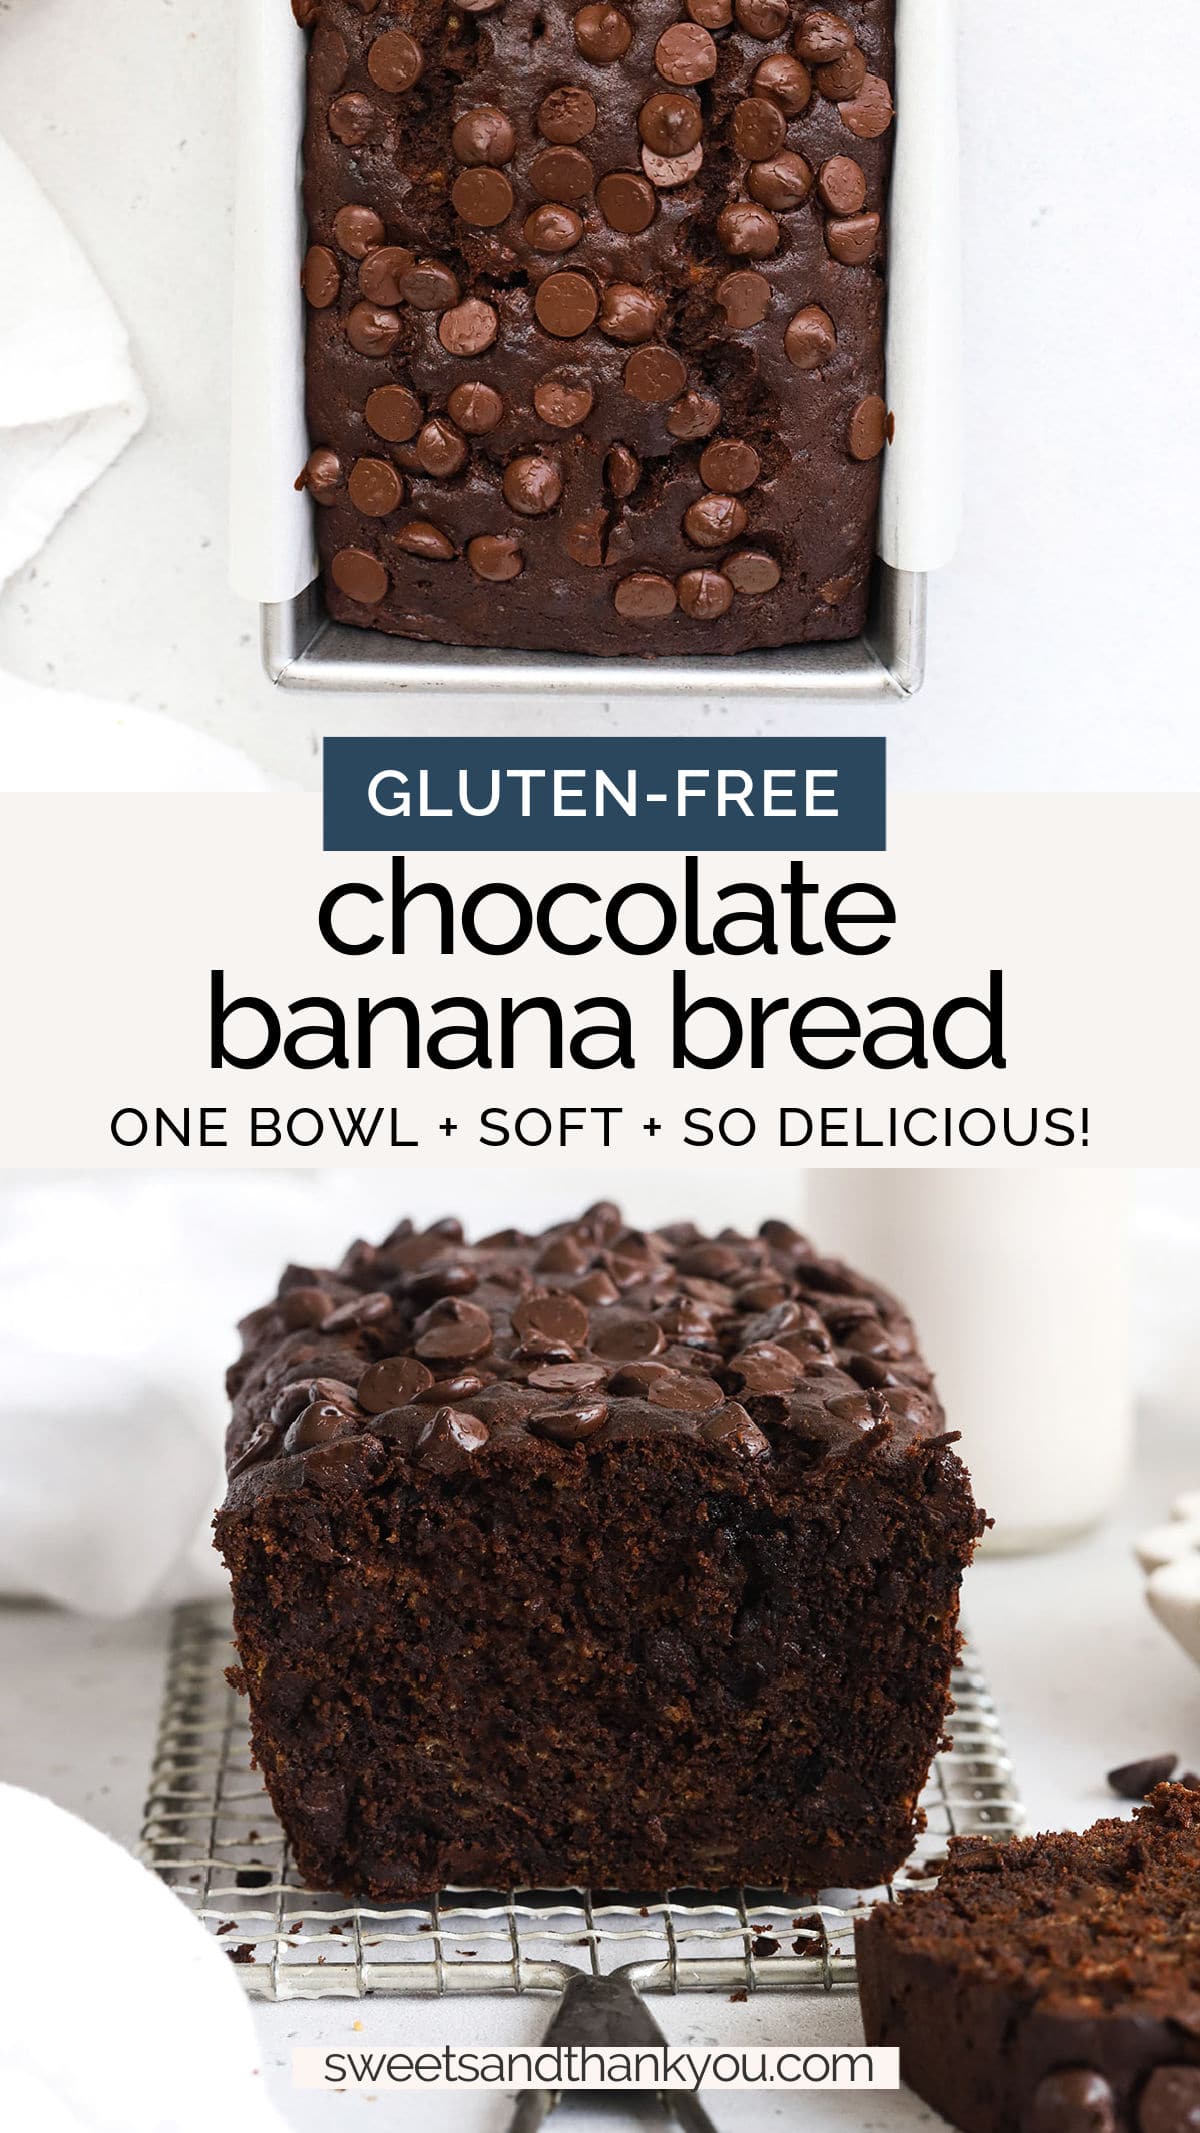 One Bowl Gluten-Free Chocolate Banana Bread - This gluten-free chocolate chocolate chip banana bread recipe is such a delightful way to use up your overripe bananas! It might just become your new favorite. // gluten-free double chocolate banana bread // gluten-free banana bread recipe // gluten-free chocolate chip banana bread // one bowl gluten-free banana bread // easy gluten-free banana bread // chocolate banana bread recipe